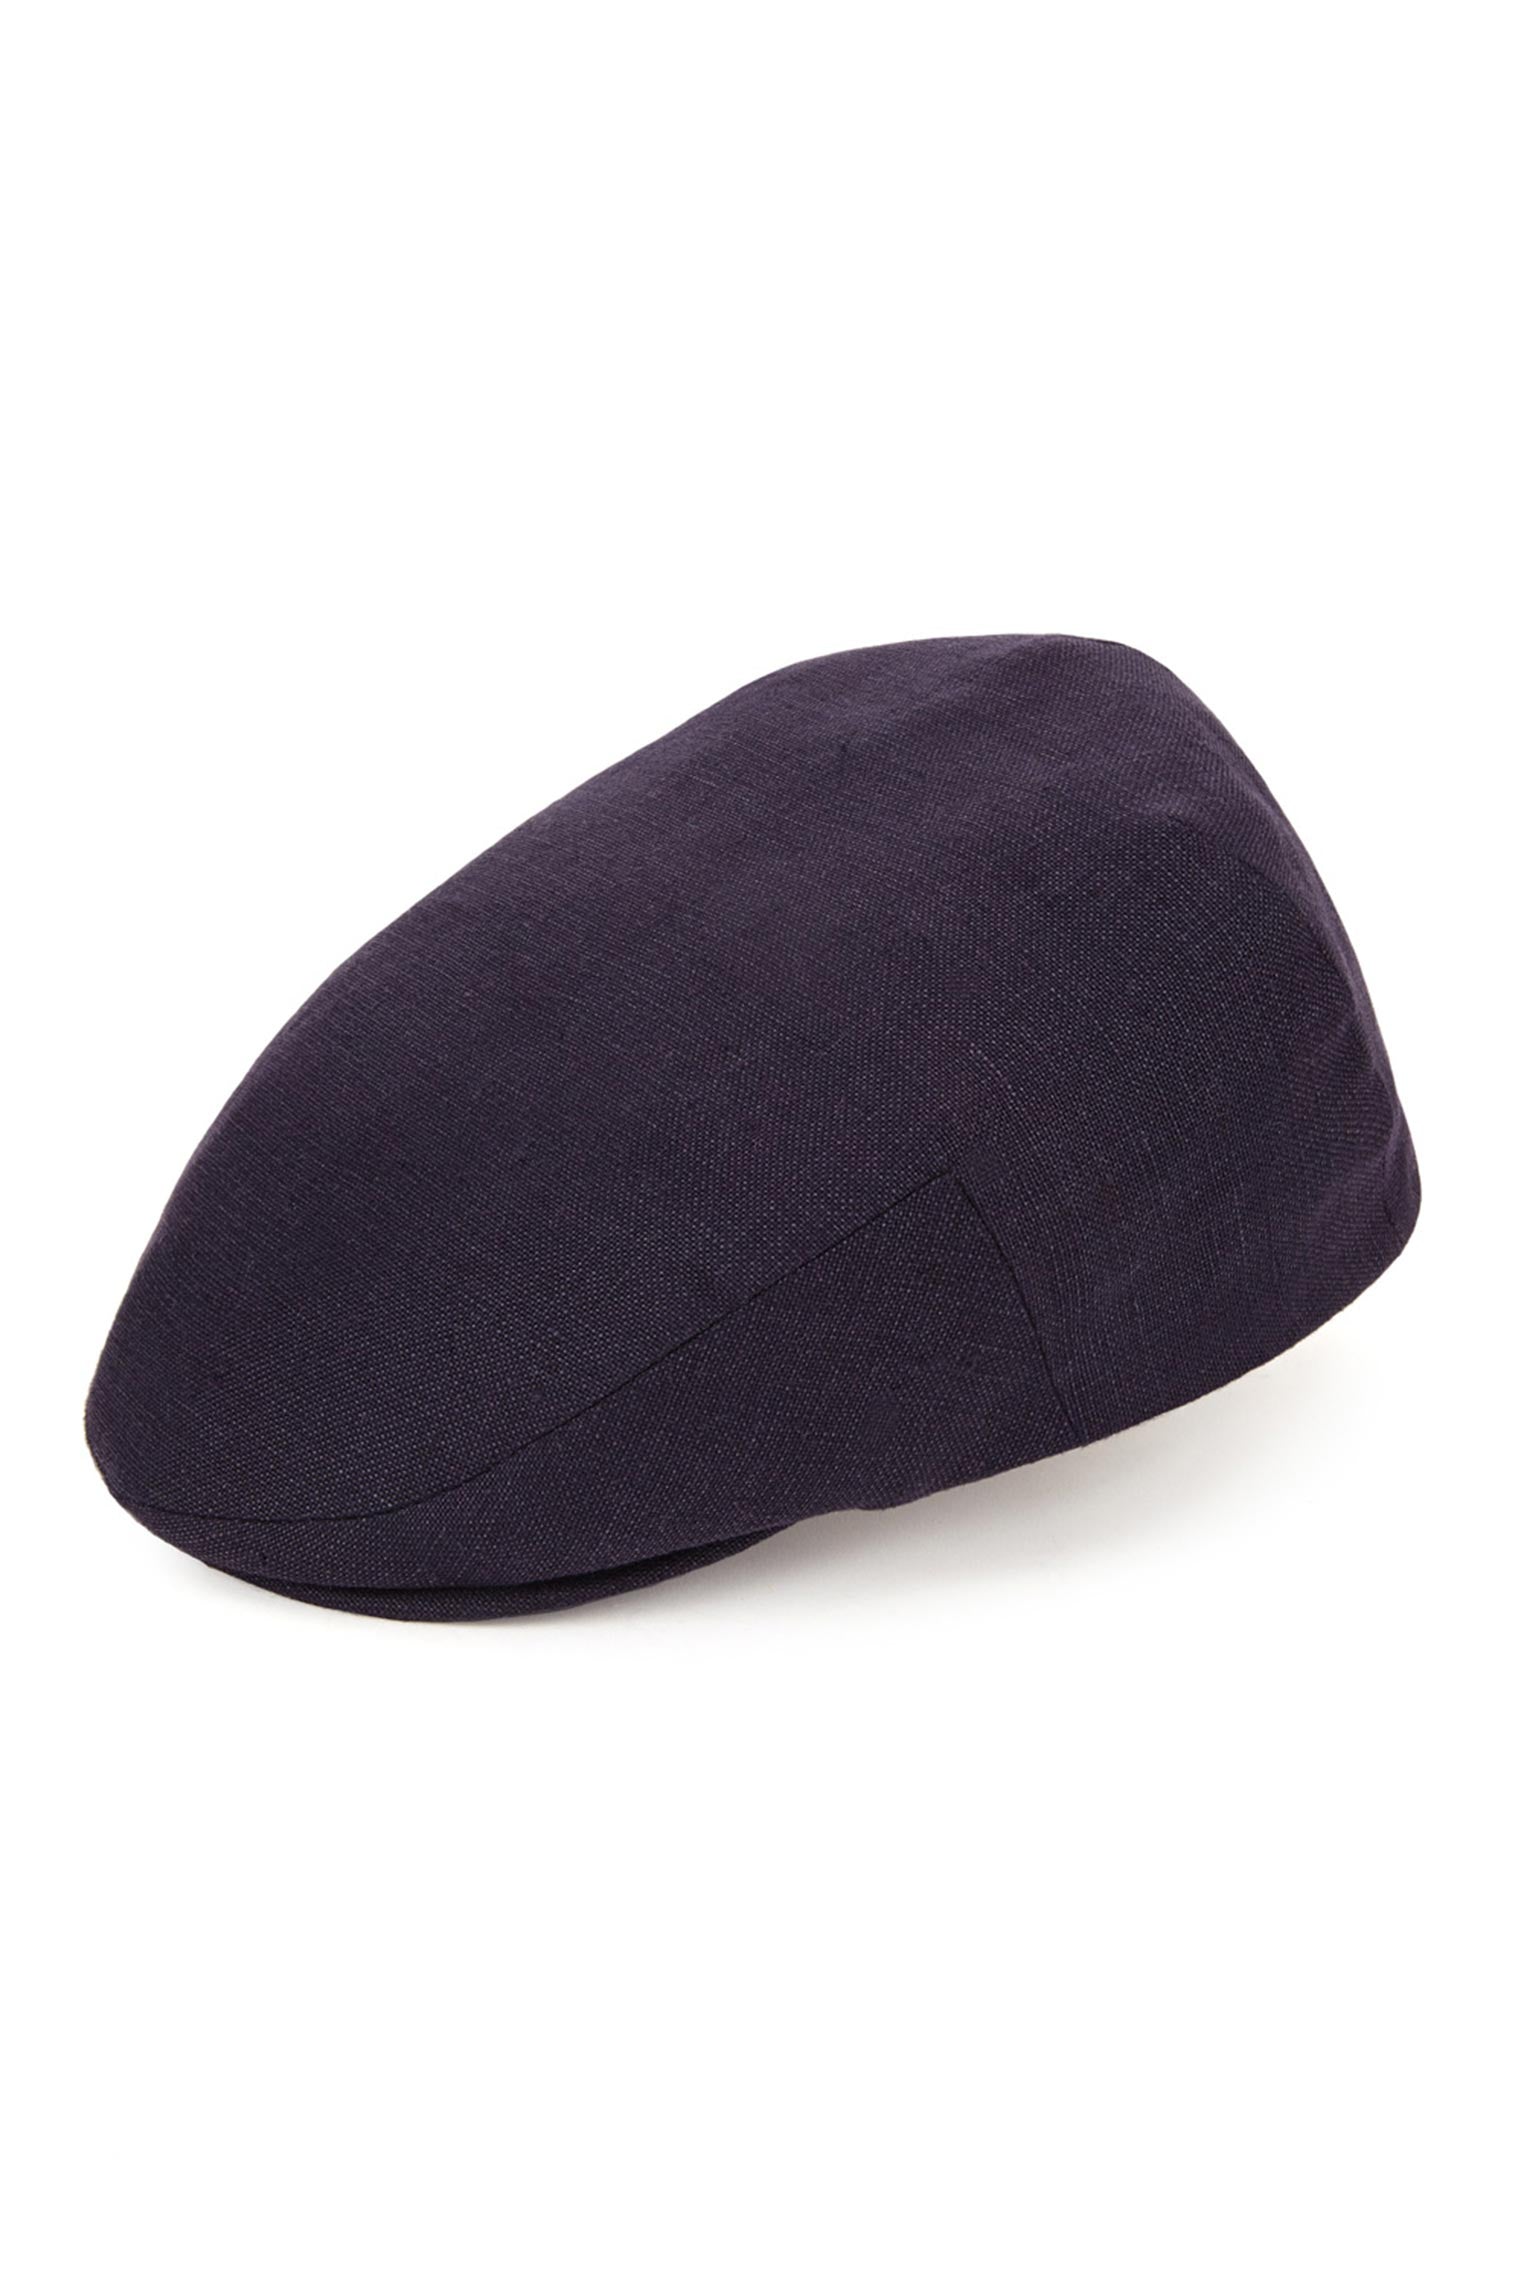 Florida Linen Flat Cap - Father's Day Gift Guide - Lock & Co. Hatters London UK